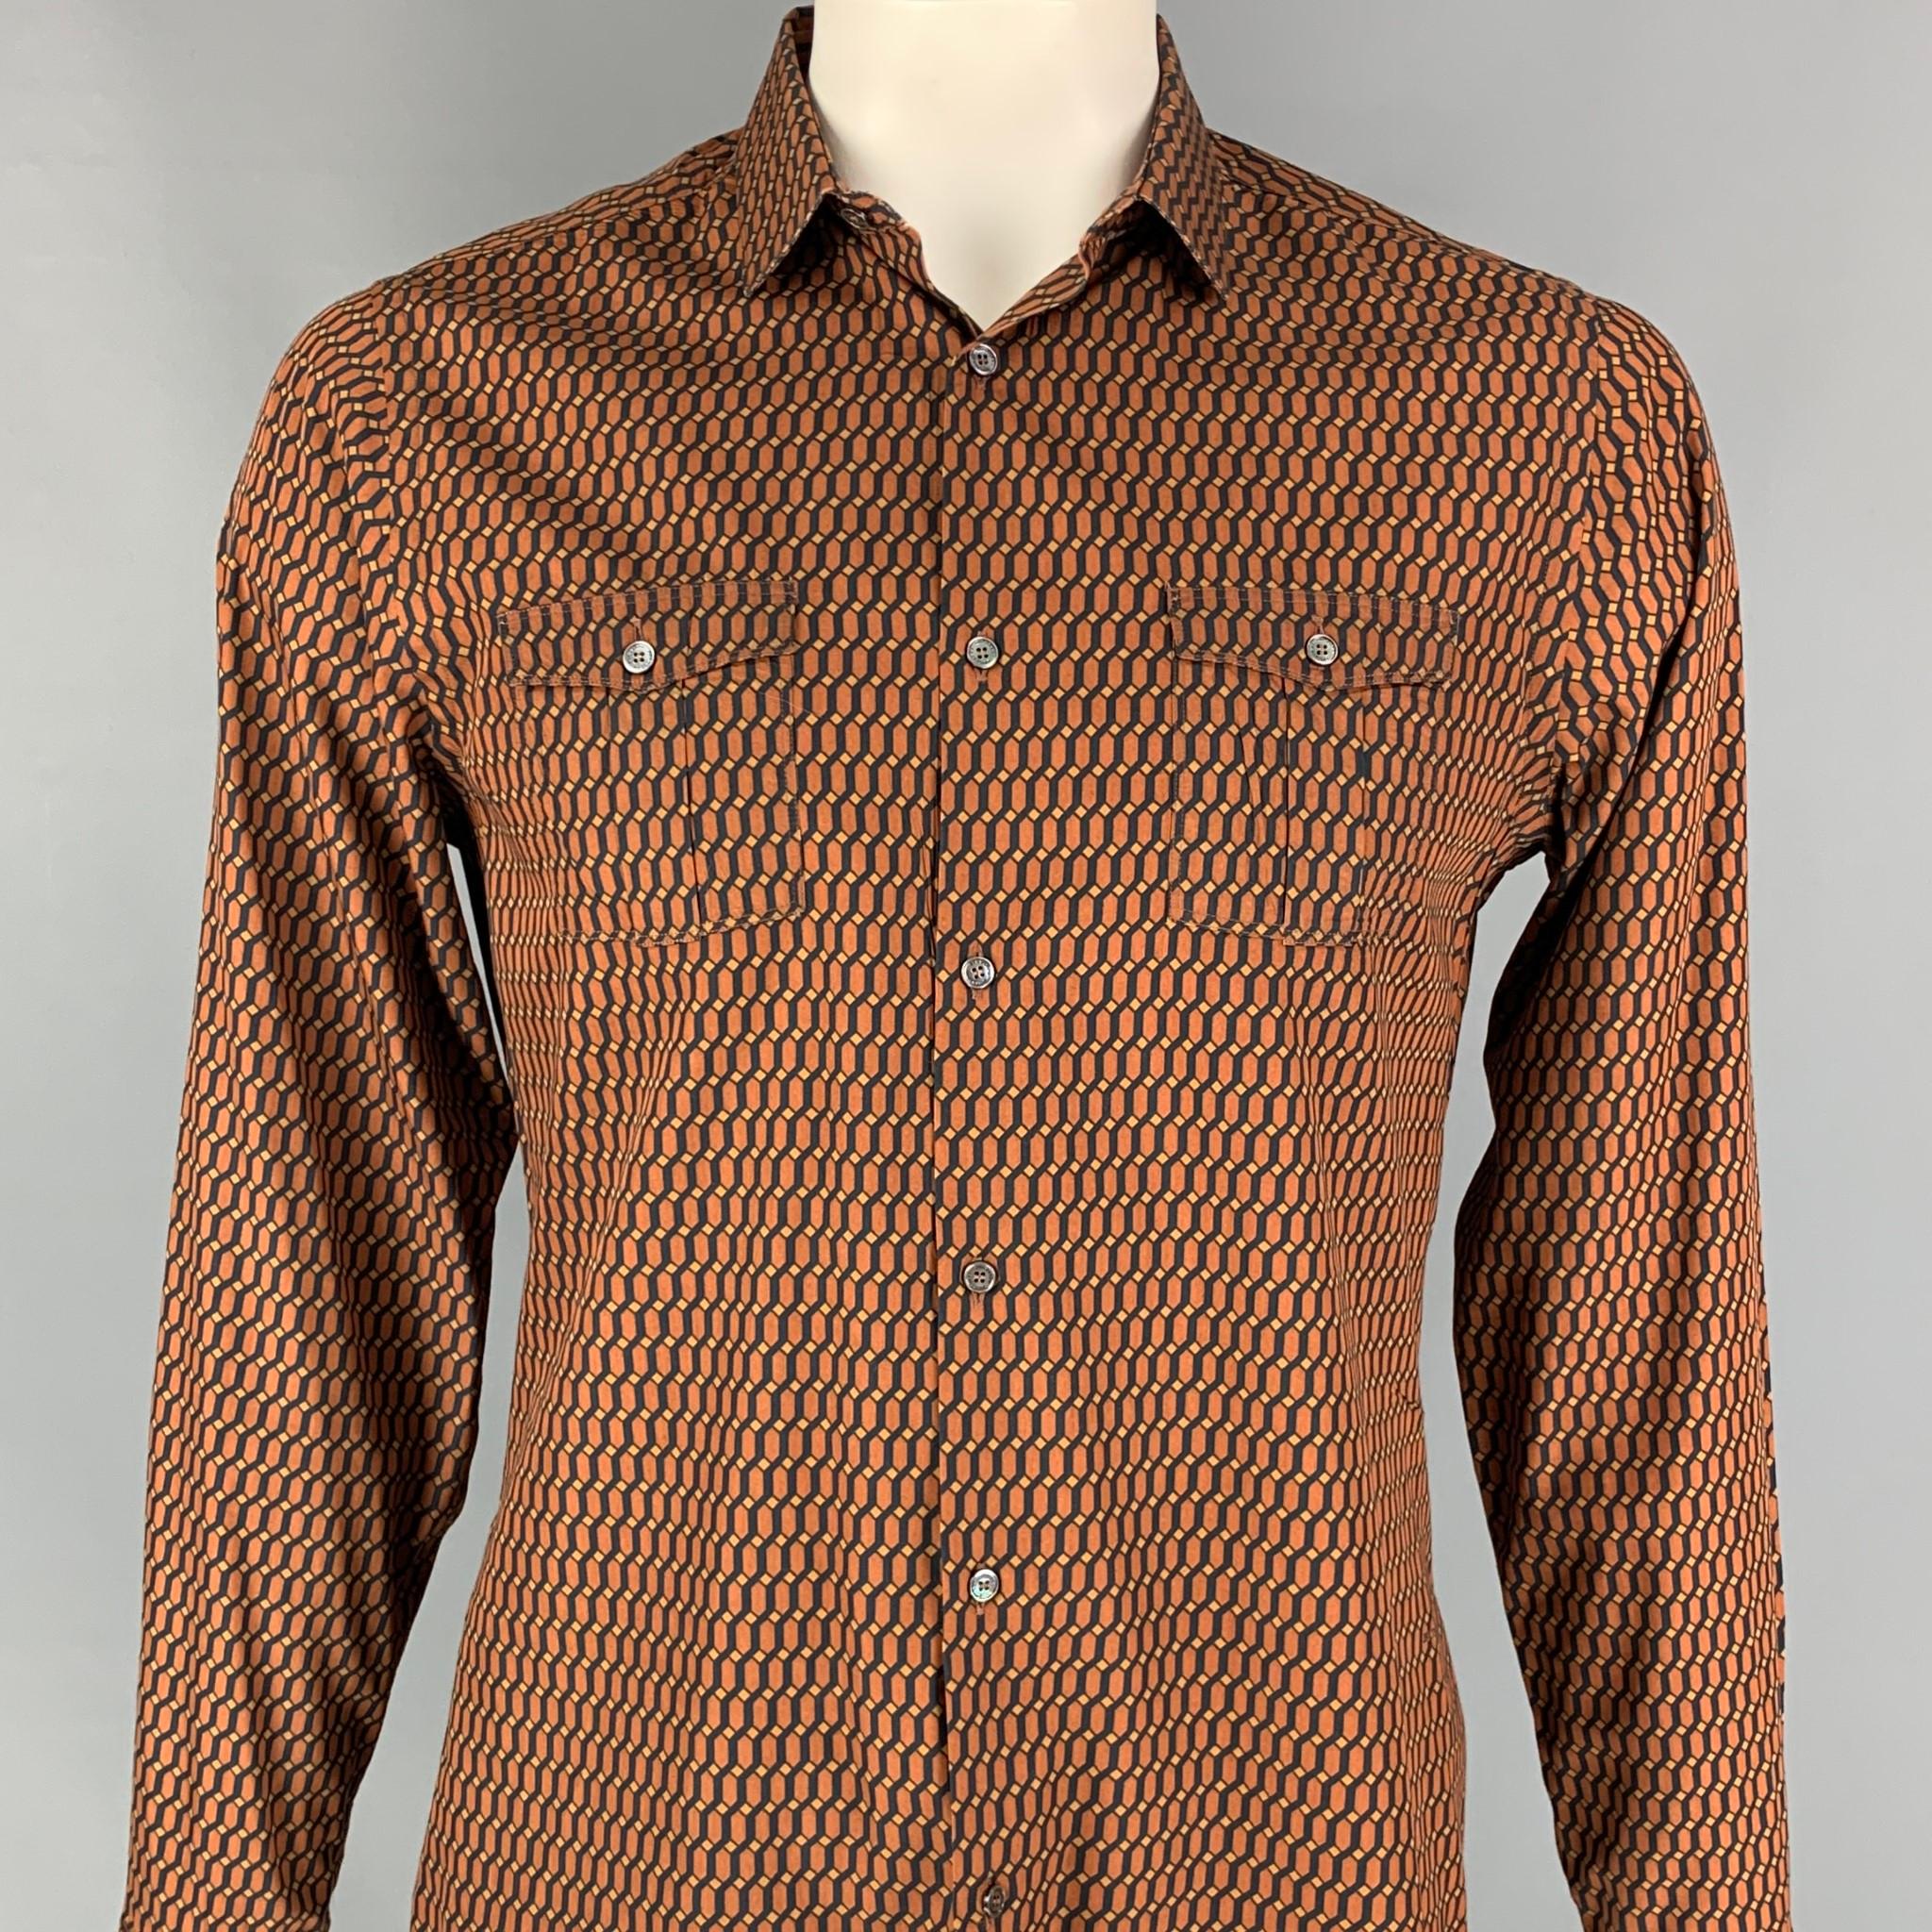 BURBERRY LONDON long sleeve shirt comes in a rust & black geometric cotton / silk featuring a tailored fit, spread collar, front pockets, and a buttoned closure. 

Excellent Pre-Owned Condition.
Marked: L

Measurements:

Shoulder: 17.5 in.
Chest: 42